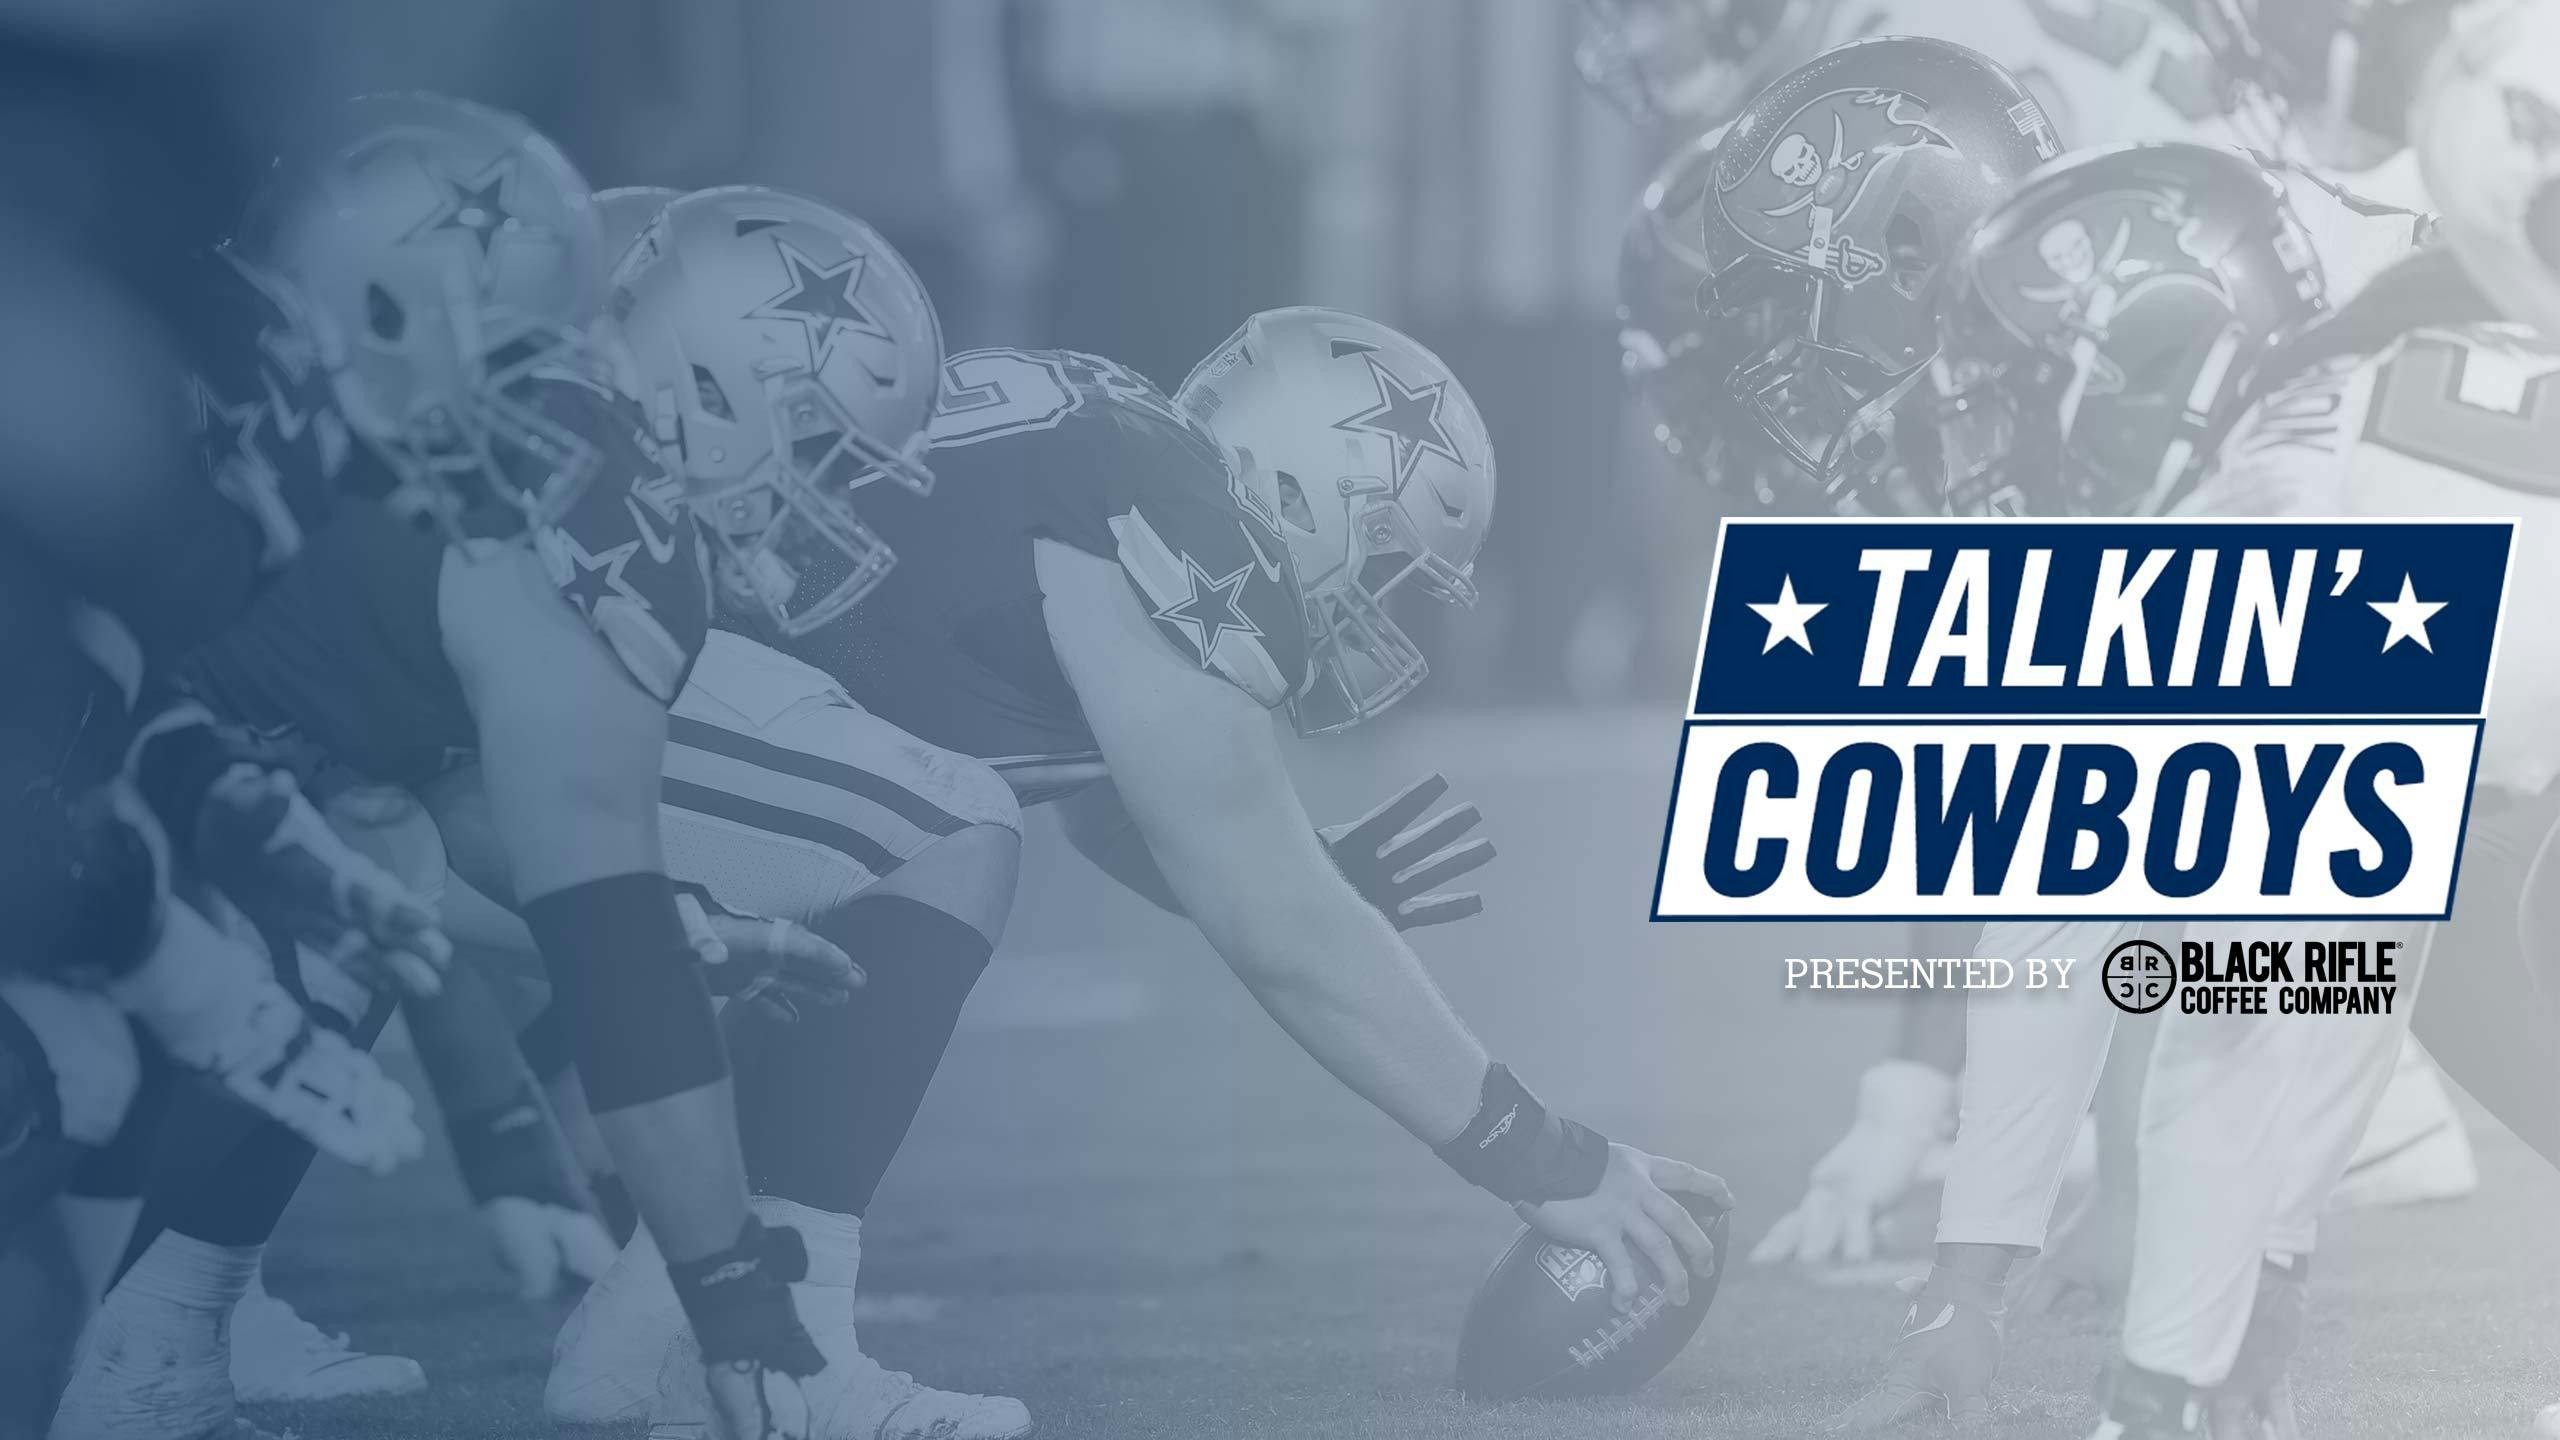 Talkin’ Cowboys: Who Is THE Guy?